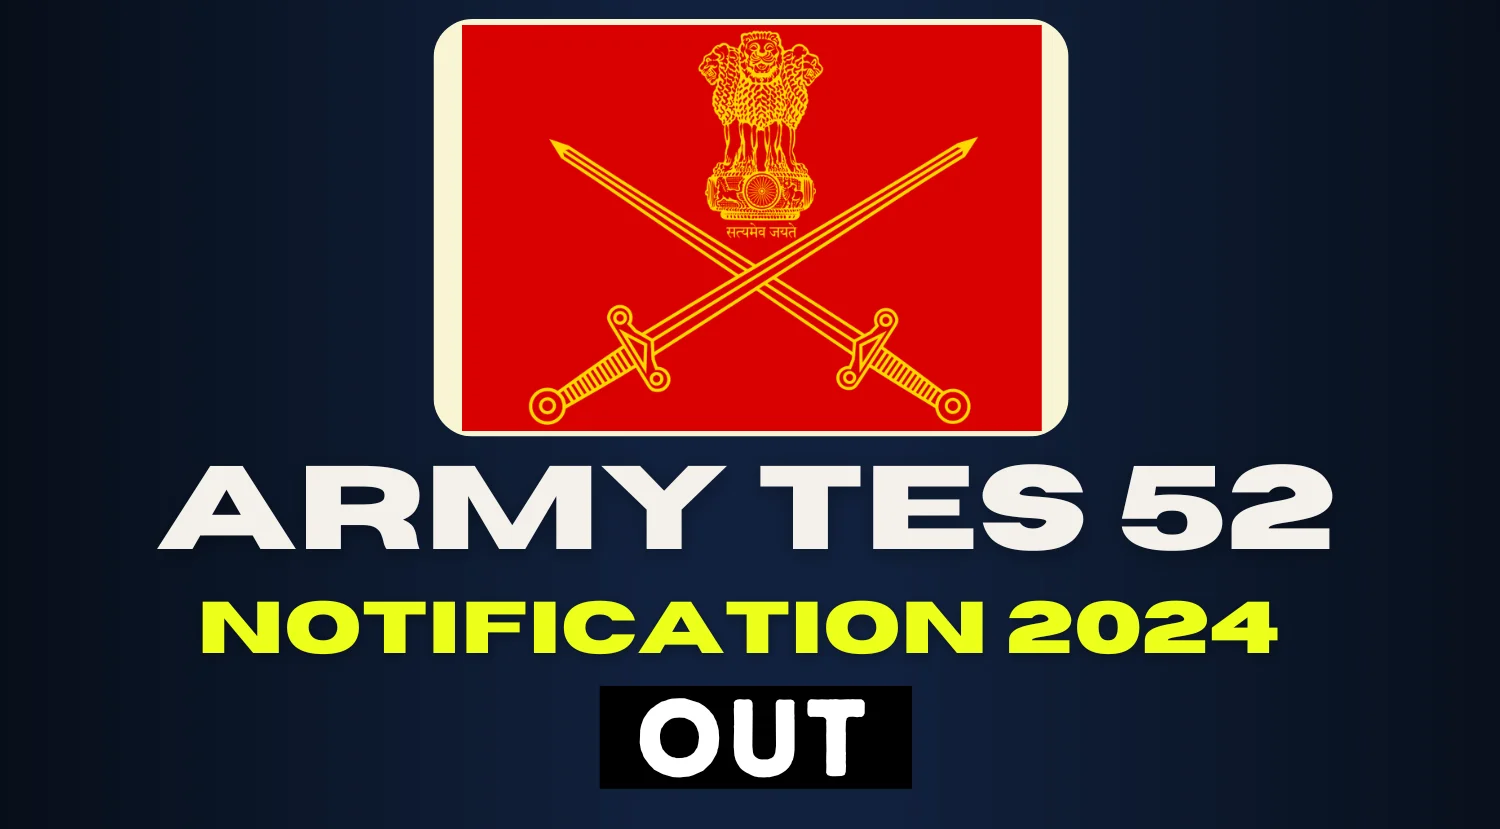 Indian Army TES 52 Notification 2024 Out